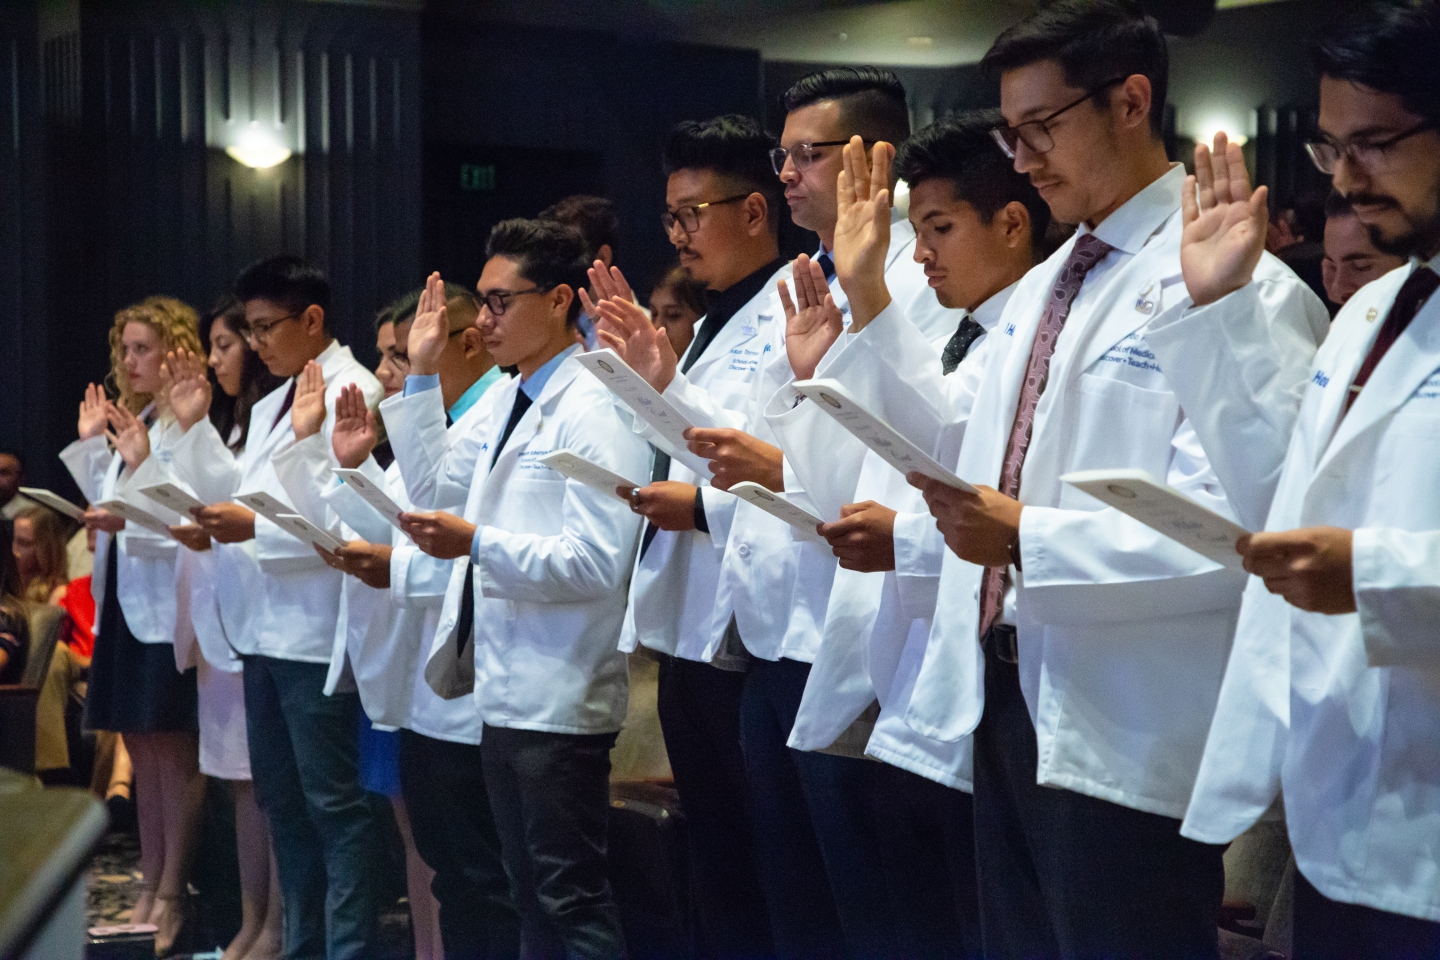 Medical Students at the White Coat Ceremony